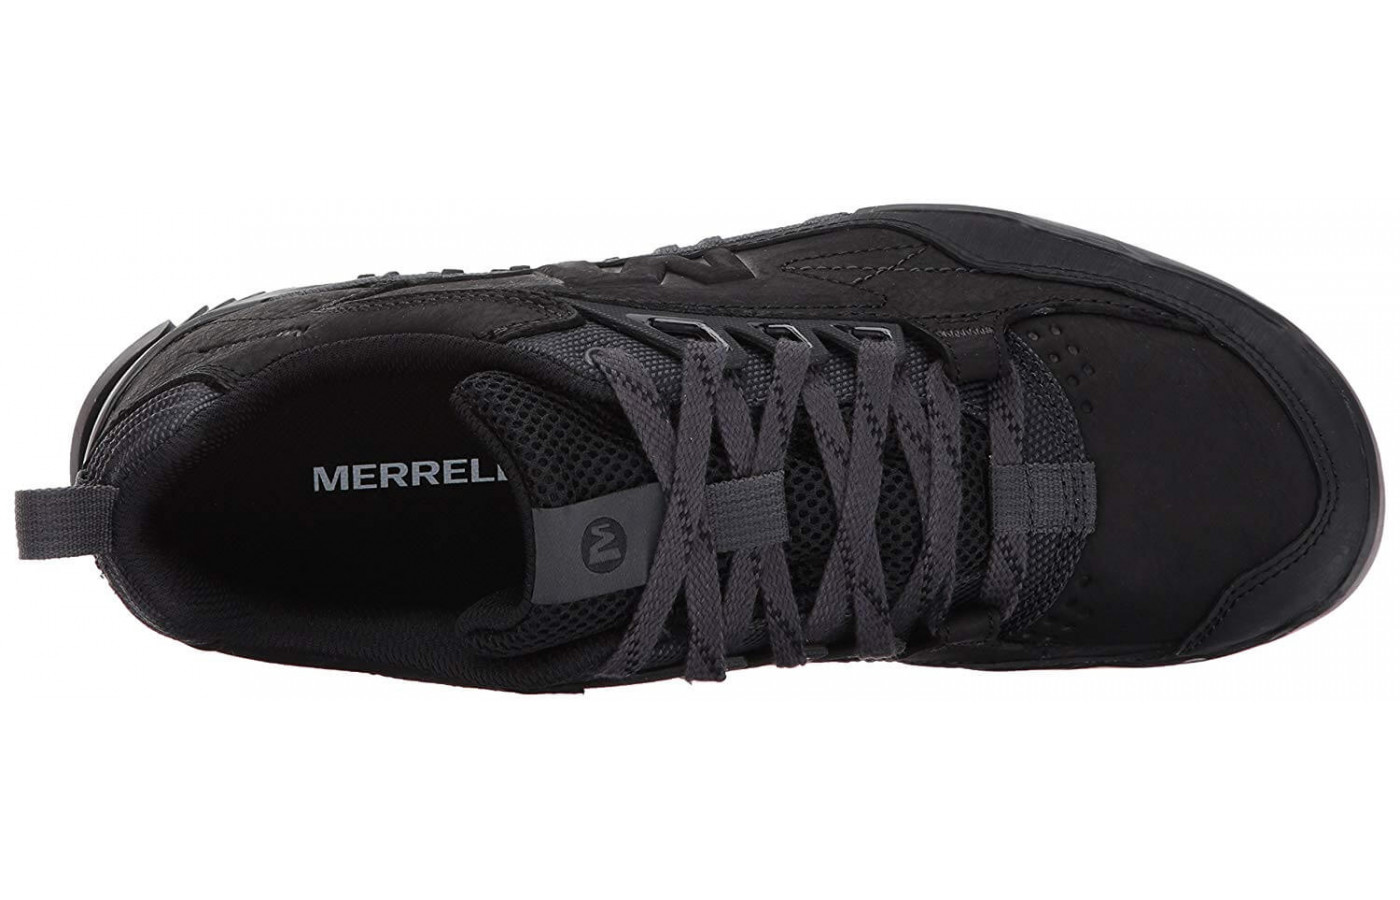 The Merrell Men's Annex Trak Low Shoe is highly durable